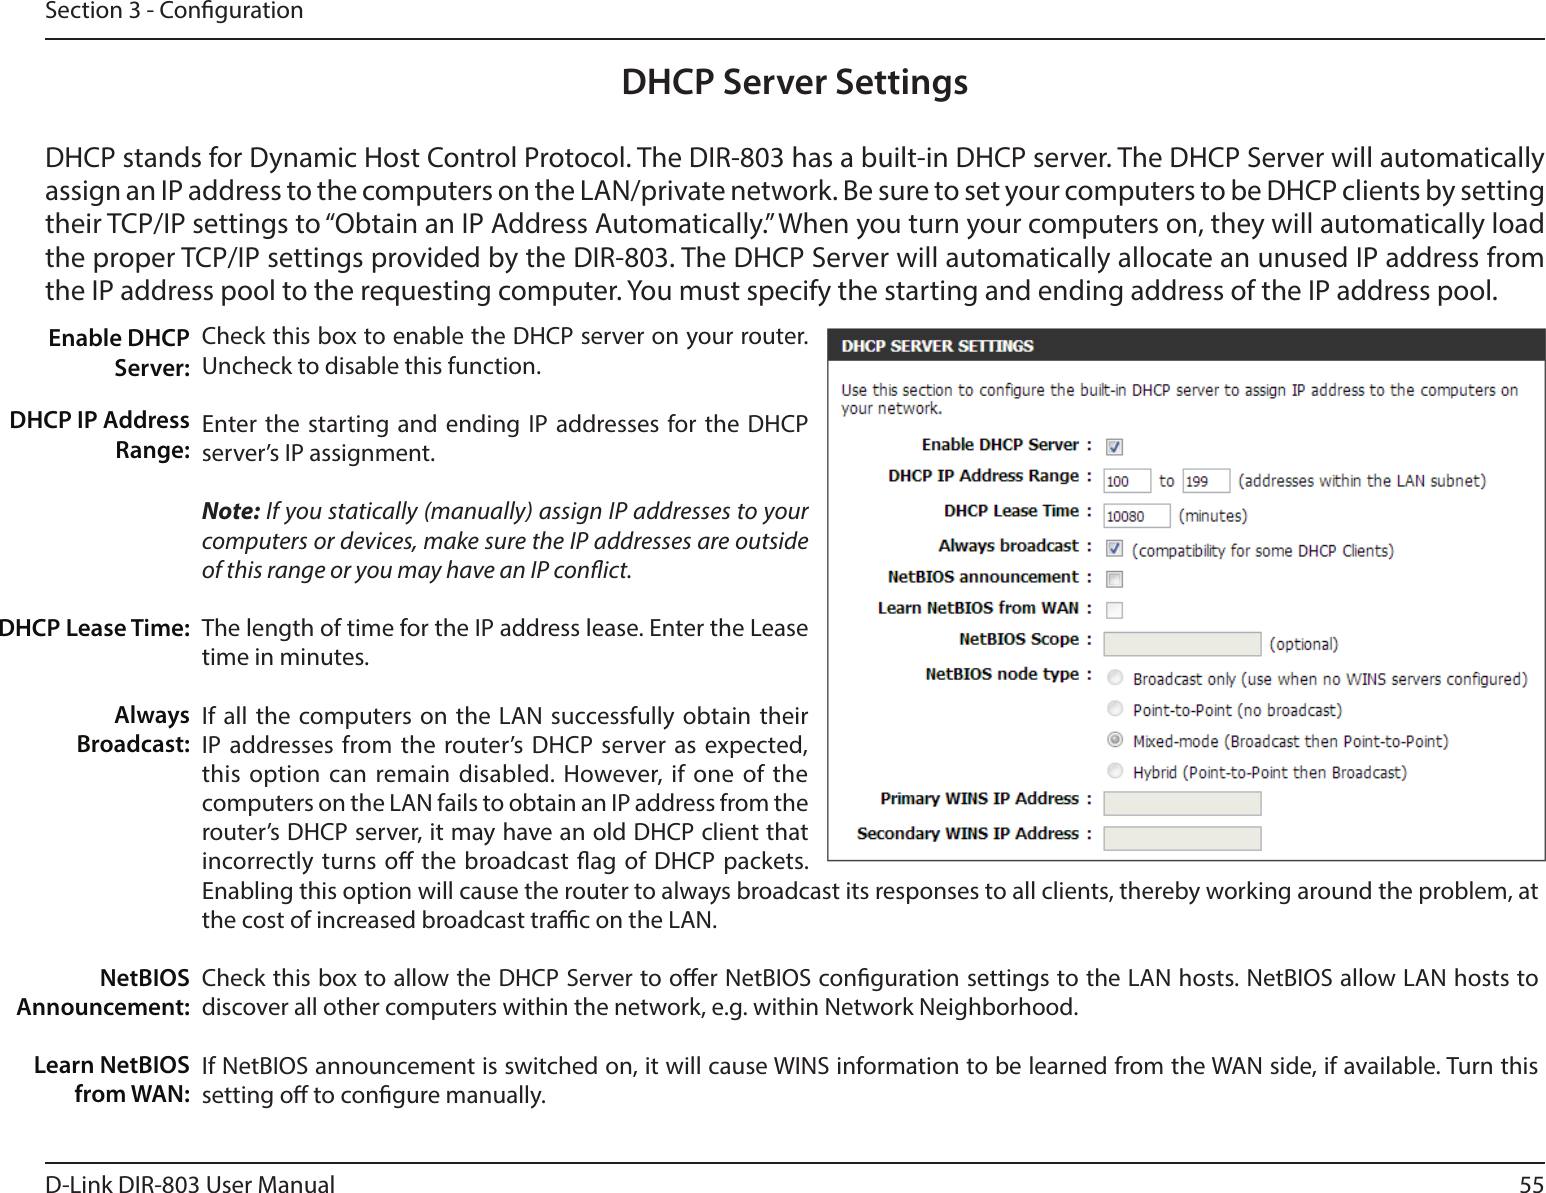 55D-Link DIR-803 User ManualSection 3 - CongurationDHCP Server SettingsDHCP stands for Dynamic Host Control Protocol. The DIR-803 has a built-in DHCP server. The DHCP Server will automatically assign an IP address to the computers on the LAN/private network. Be sure to set your computers to be DHCP clients by setting their TCP/IP settings to “Obtain an IP Address Automatically.” When you turn your computers on, they will automatically load the proper TCP/IP settings provided by the DIR-803. The DHCP Server will automatically allocate an unused IP address from the IP address pool to the requesting computer. You must specify the starting and ending address of the IP address pool.Check this box to enable the DHCP server on your router. Uncheck to disable this function.Enter the starting and ending IP addresses for the DHCP server’s IP assignment.Note: If you statically (manually) assign IP addresses to your computers or devices, make sure the IP addresses are outside of this range or you may have an IP conict. The length of time for the IP address lease. Enter the Lease time in minutes.If all the computers on the LAN successfully obtain their IP addresses from the router’s DHCP server as expected, this option can remain disabled. However, if one of the computers on the LAN fails to obtain an IP address from the router’s DHCP server, it may have an old DHCP client that incorrectly turns o the broadcast ag of DHCP packets. Enabling this option will cause the router to always broadcast its responses to all clients, thereby working around the problem, at the cost of increased broadcast trac on the LAN.Check this box to allow the DHCP Server to oer NetBIOS conguration settings to the LAN hosts. NetBIOS allow LAN hosts to discover all other computers within the network, e.g. within Network Neighborhood.If NetBIOS announcement is switched on, it will cause WINS information to be learned from the WAN side, if available. Turn this setting o to congure manually.Enable DHCP Server:DHCP IP Address Range:DHCP Lease Time:Always Broadcast:NetBIOS Announcement:Learn NetBIOS from WAN: